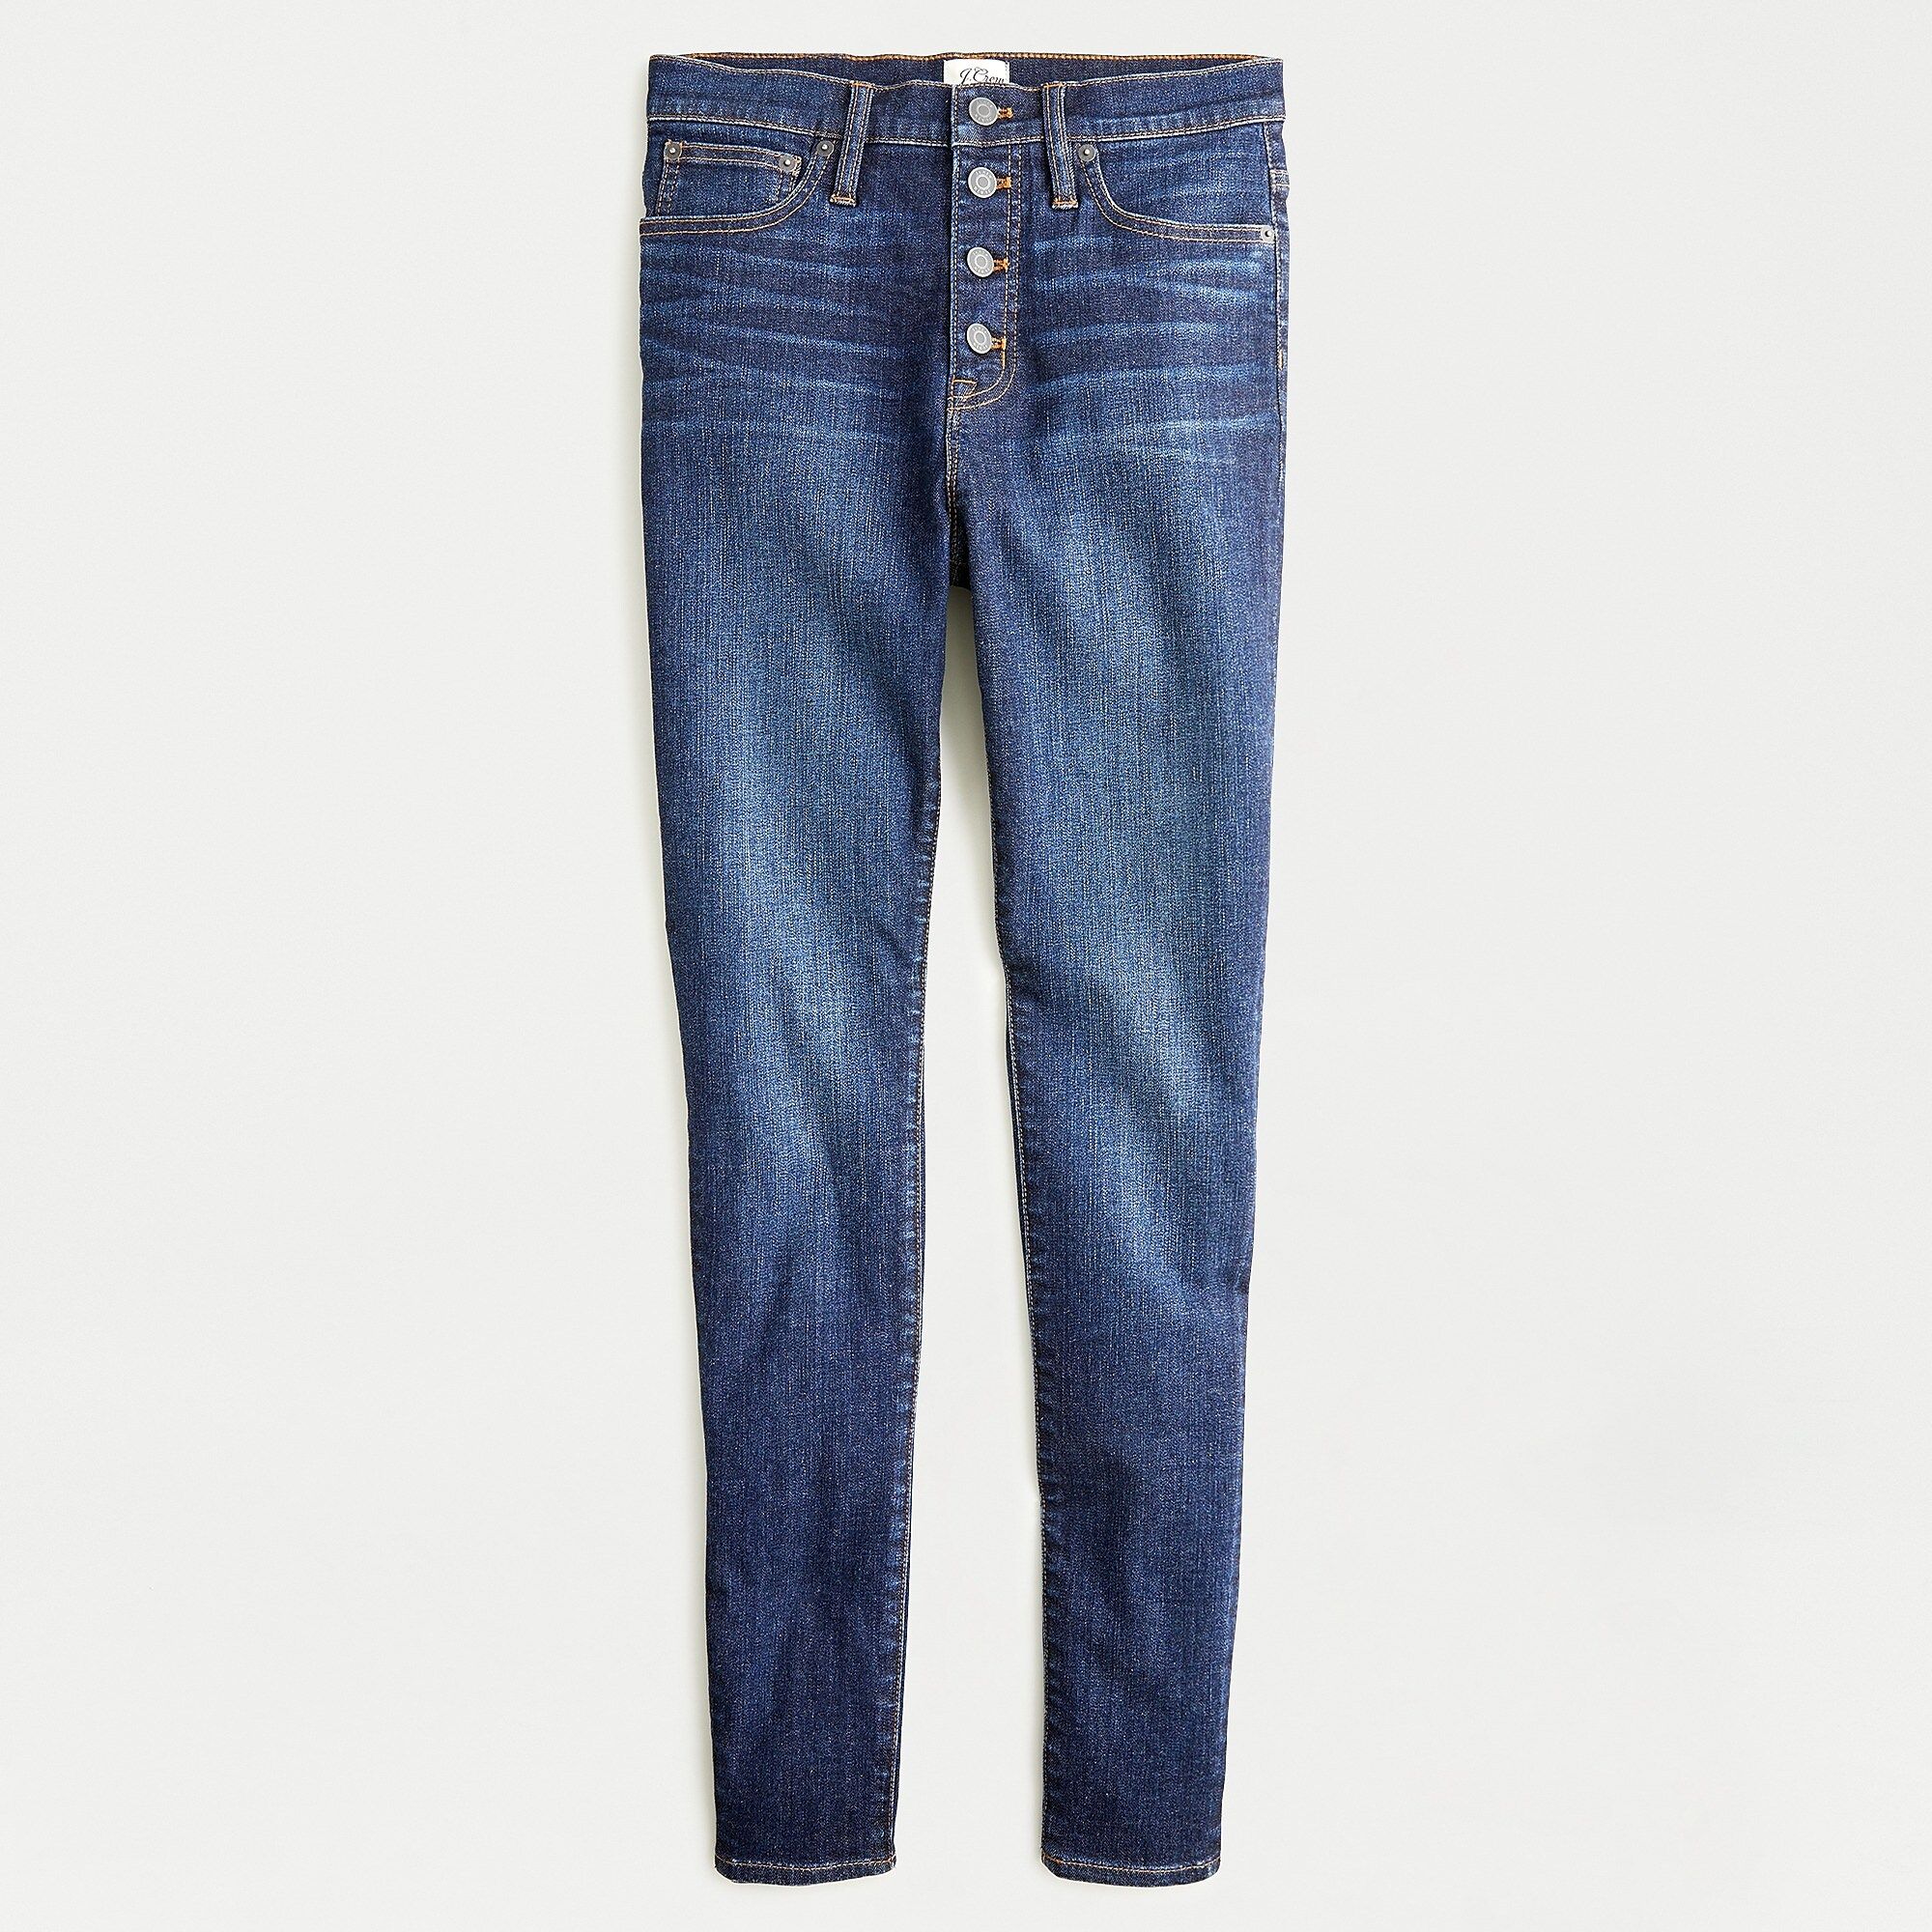 10" highest-rise toothpick jean with button fly | J.Crew US